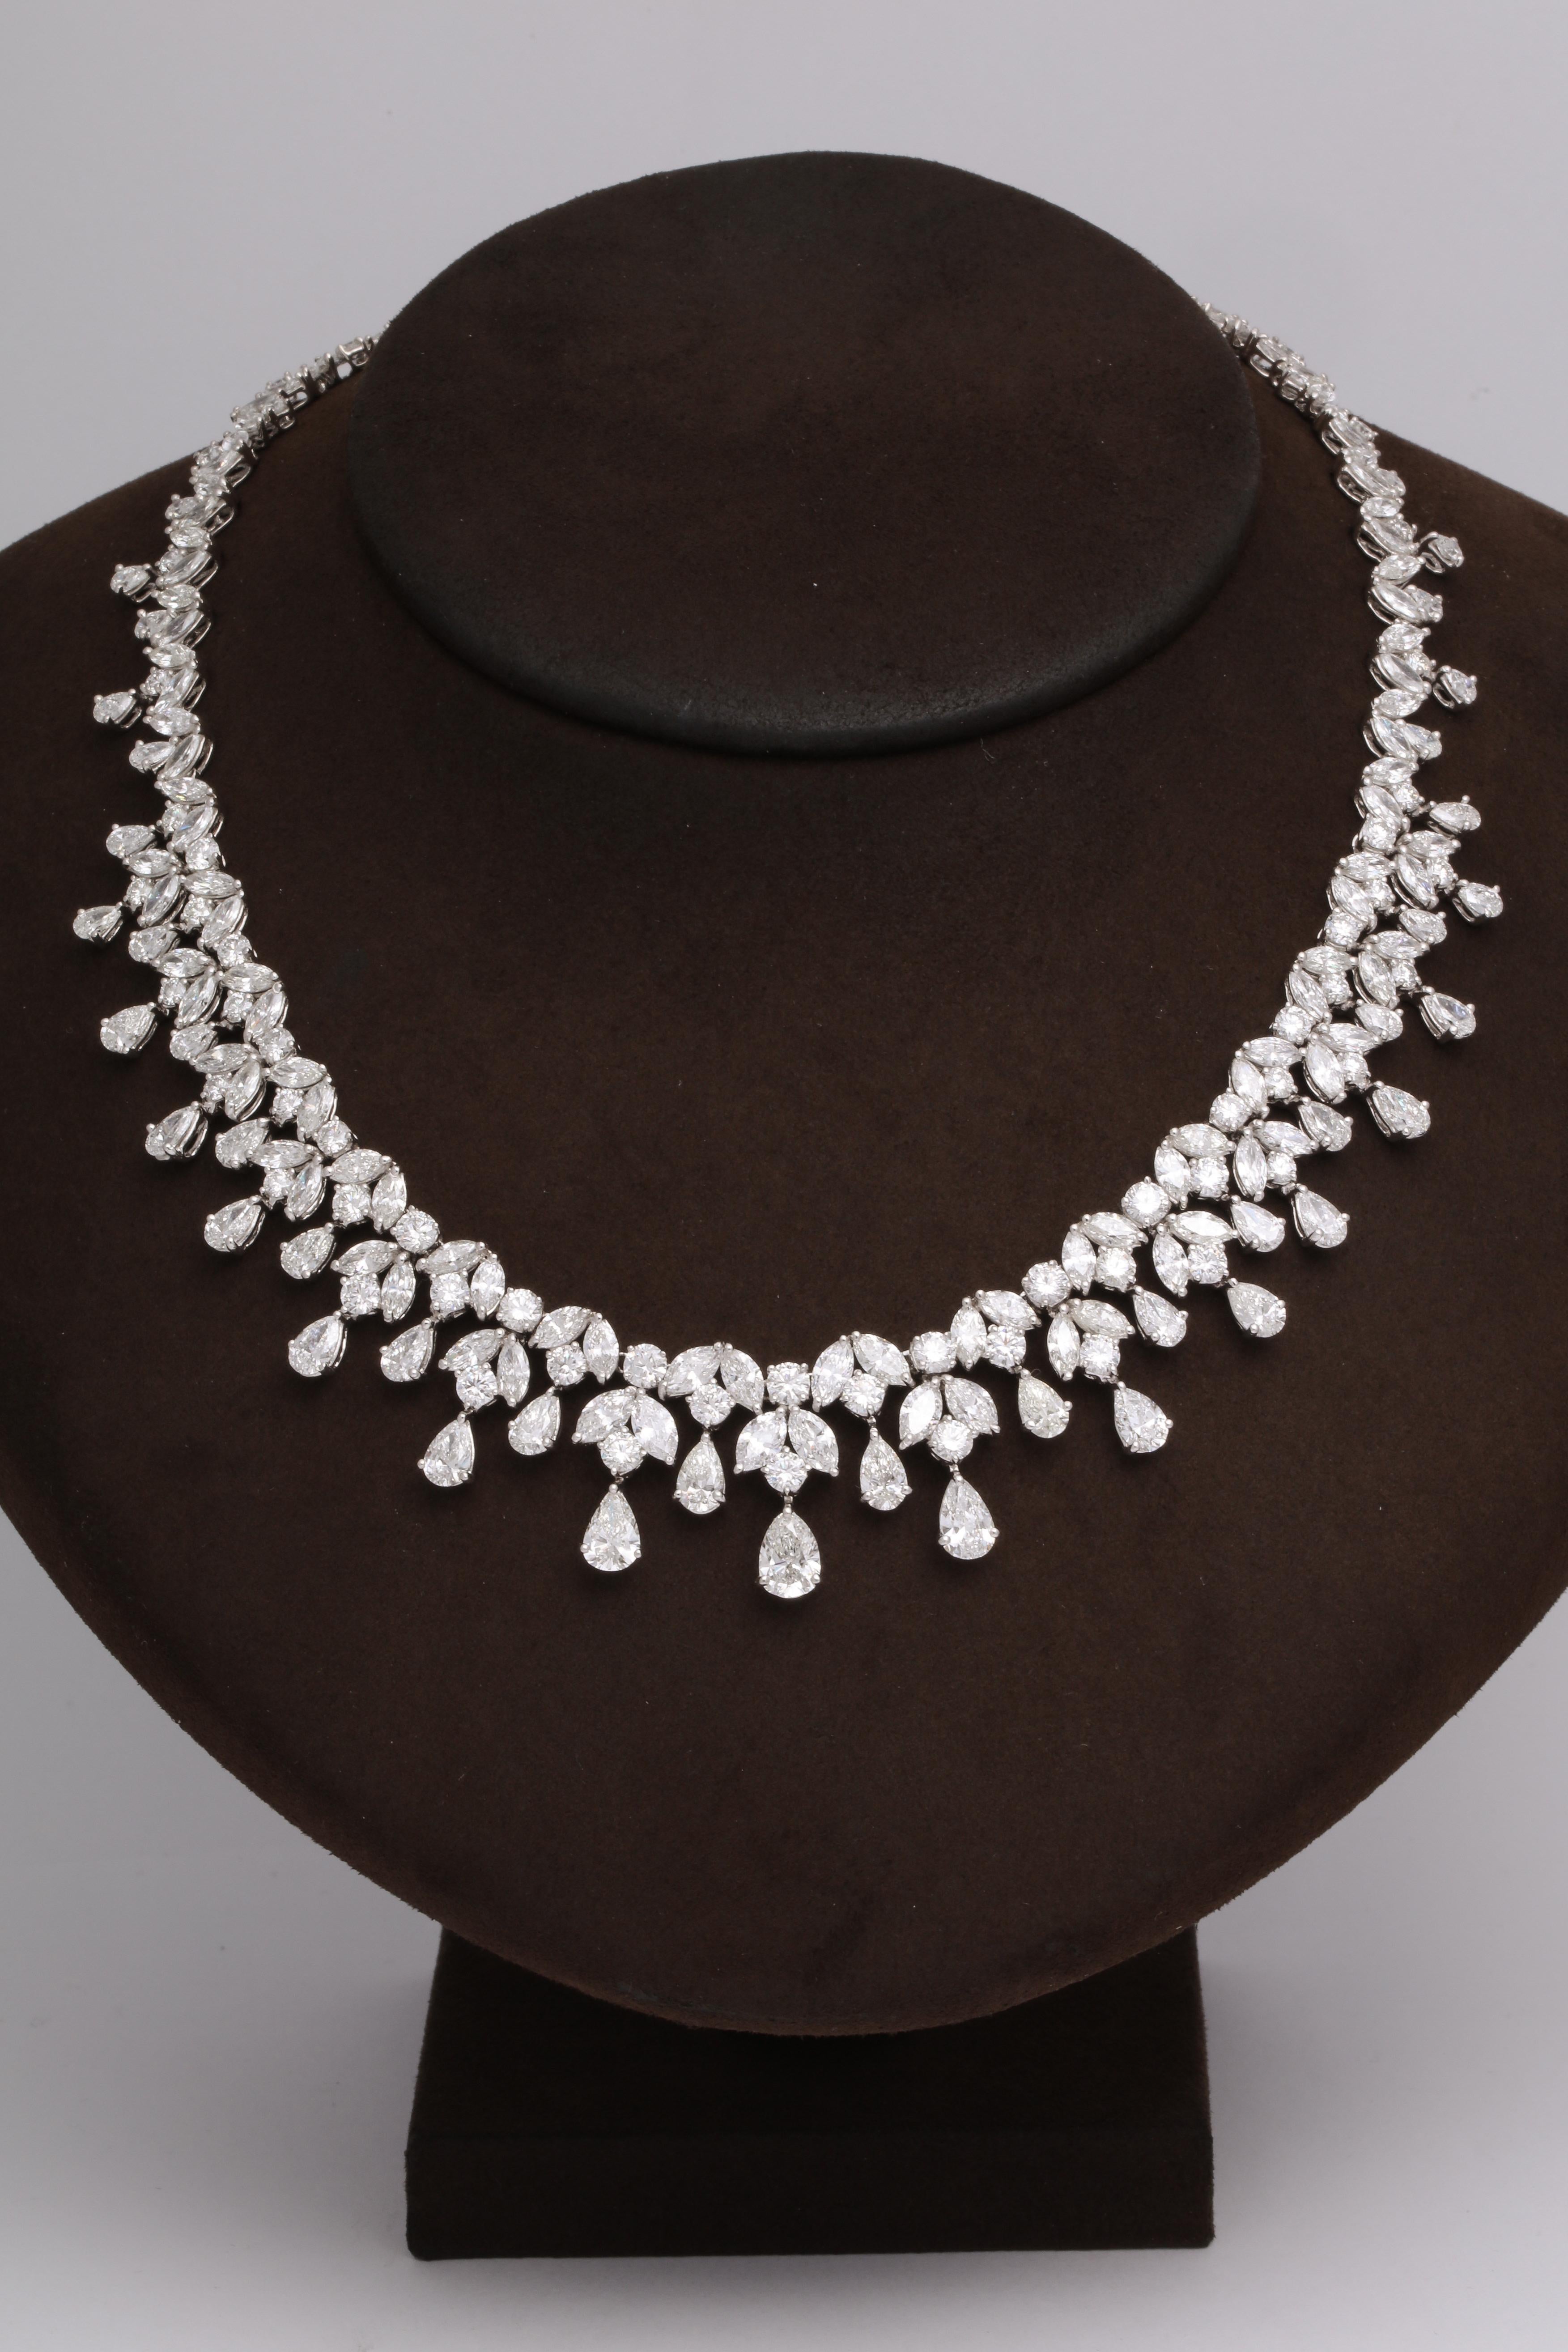 
One of our favorite designs, this necklace is SPECTACULAR!!

A timeless design featuring 48.28 carats of white pear, marquise and round cut diamonds set in platinum. 

A grand piece -- the perfect addition to any collection. 

16 inch length that